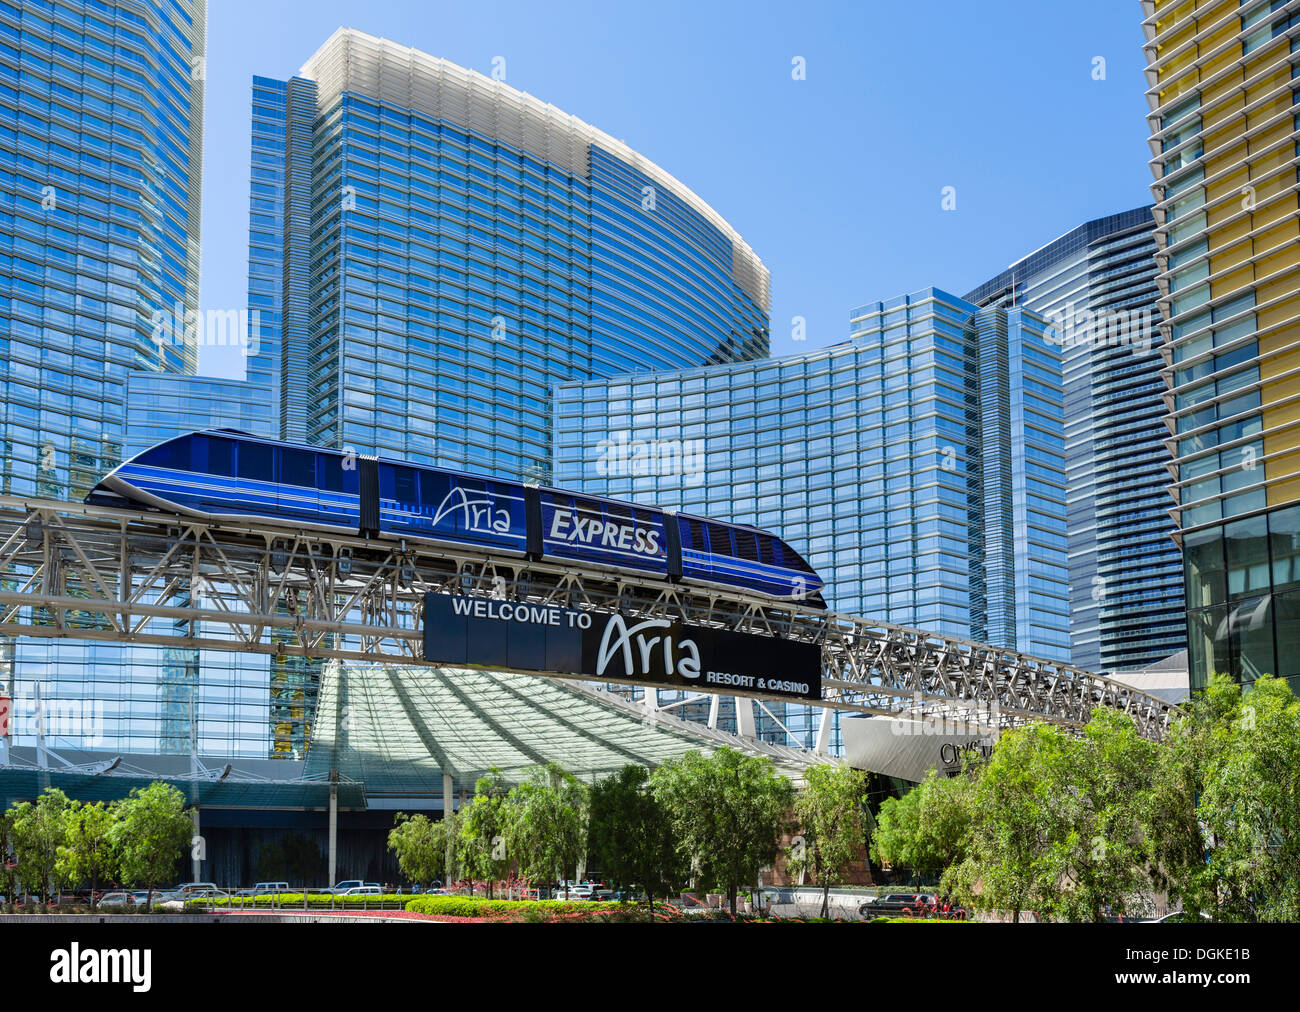 The Aria Express monorail in front of the Aria Resort and Casino, Las Vegas, Nevada, USA Stock Photo